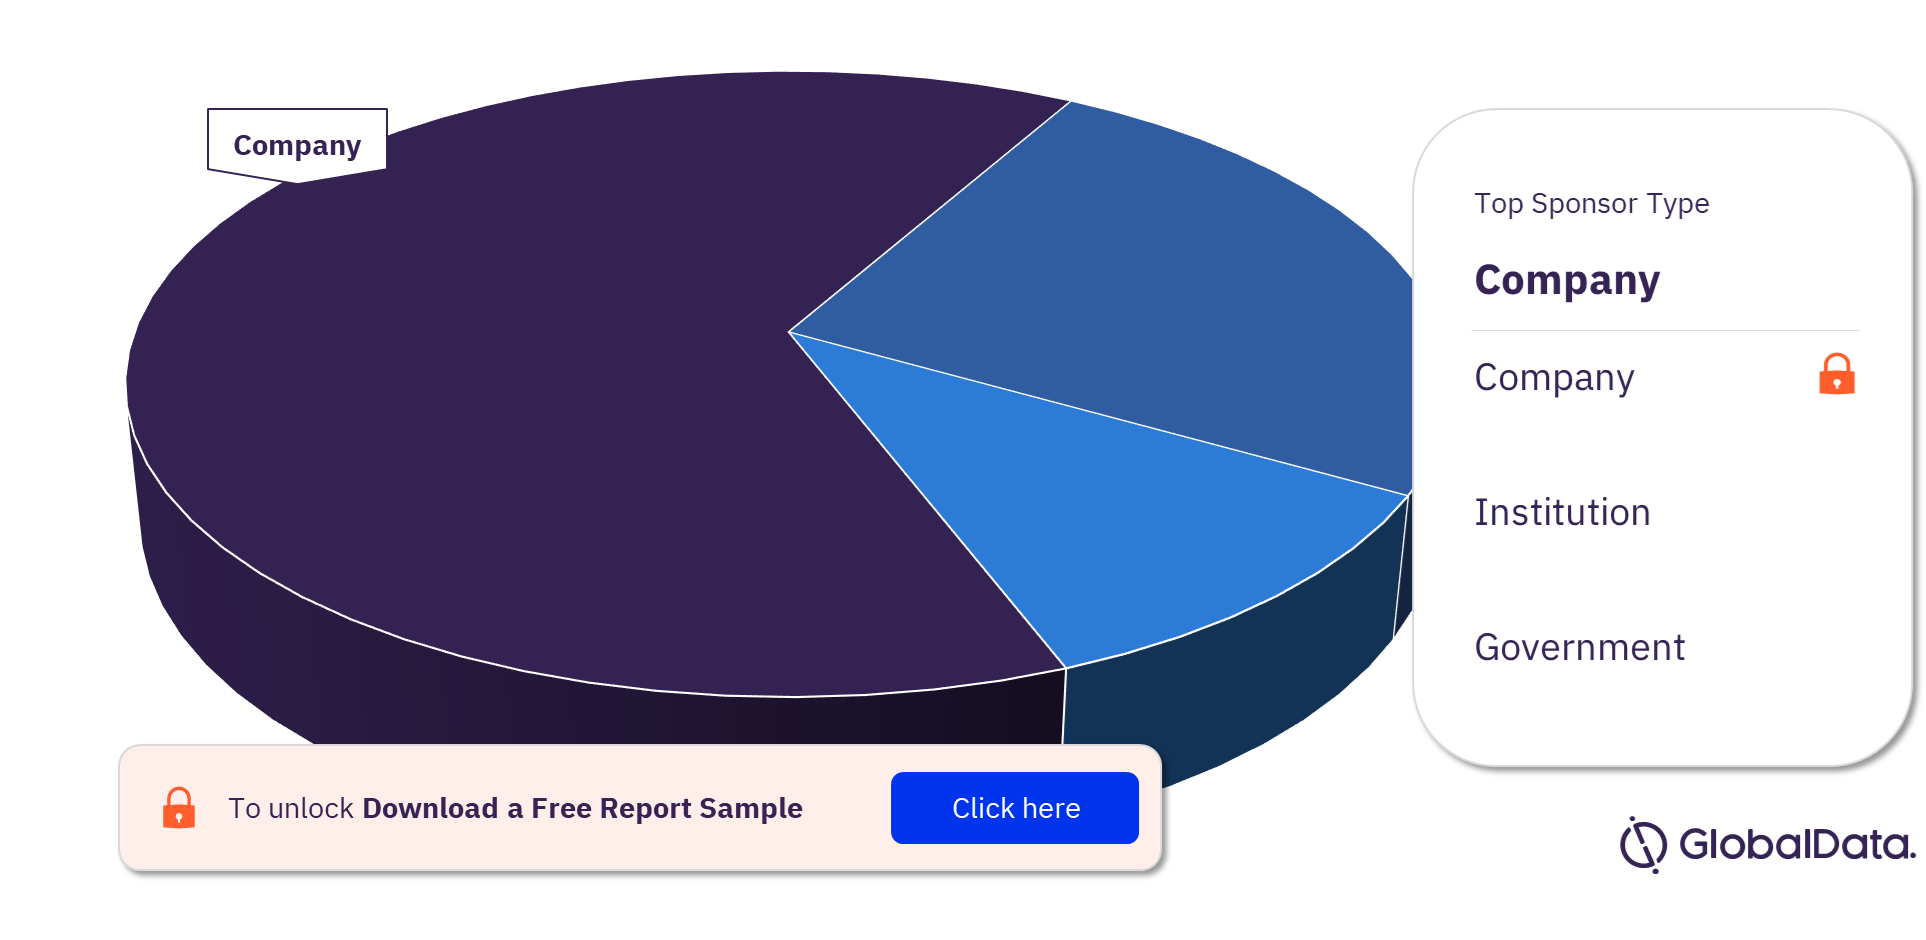 Tourette Syndrome Clinical Trials Market Analysis by Sponsor Types, 2023 (%)